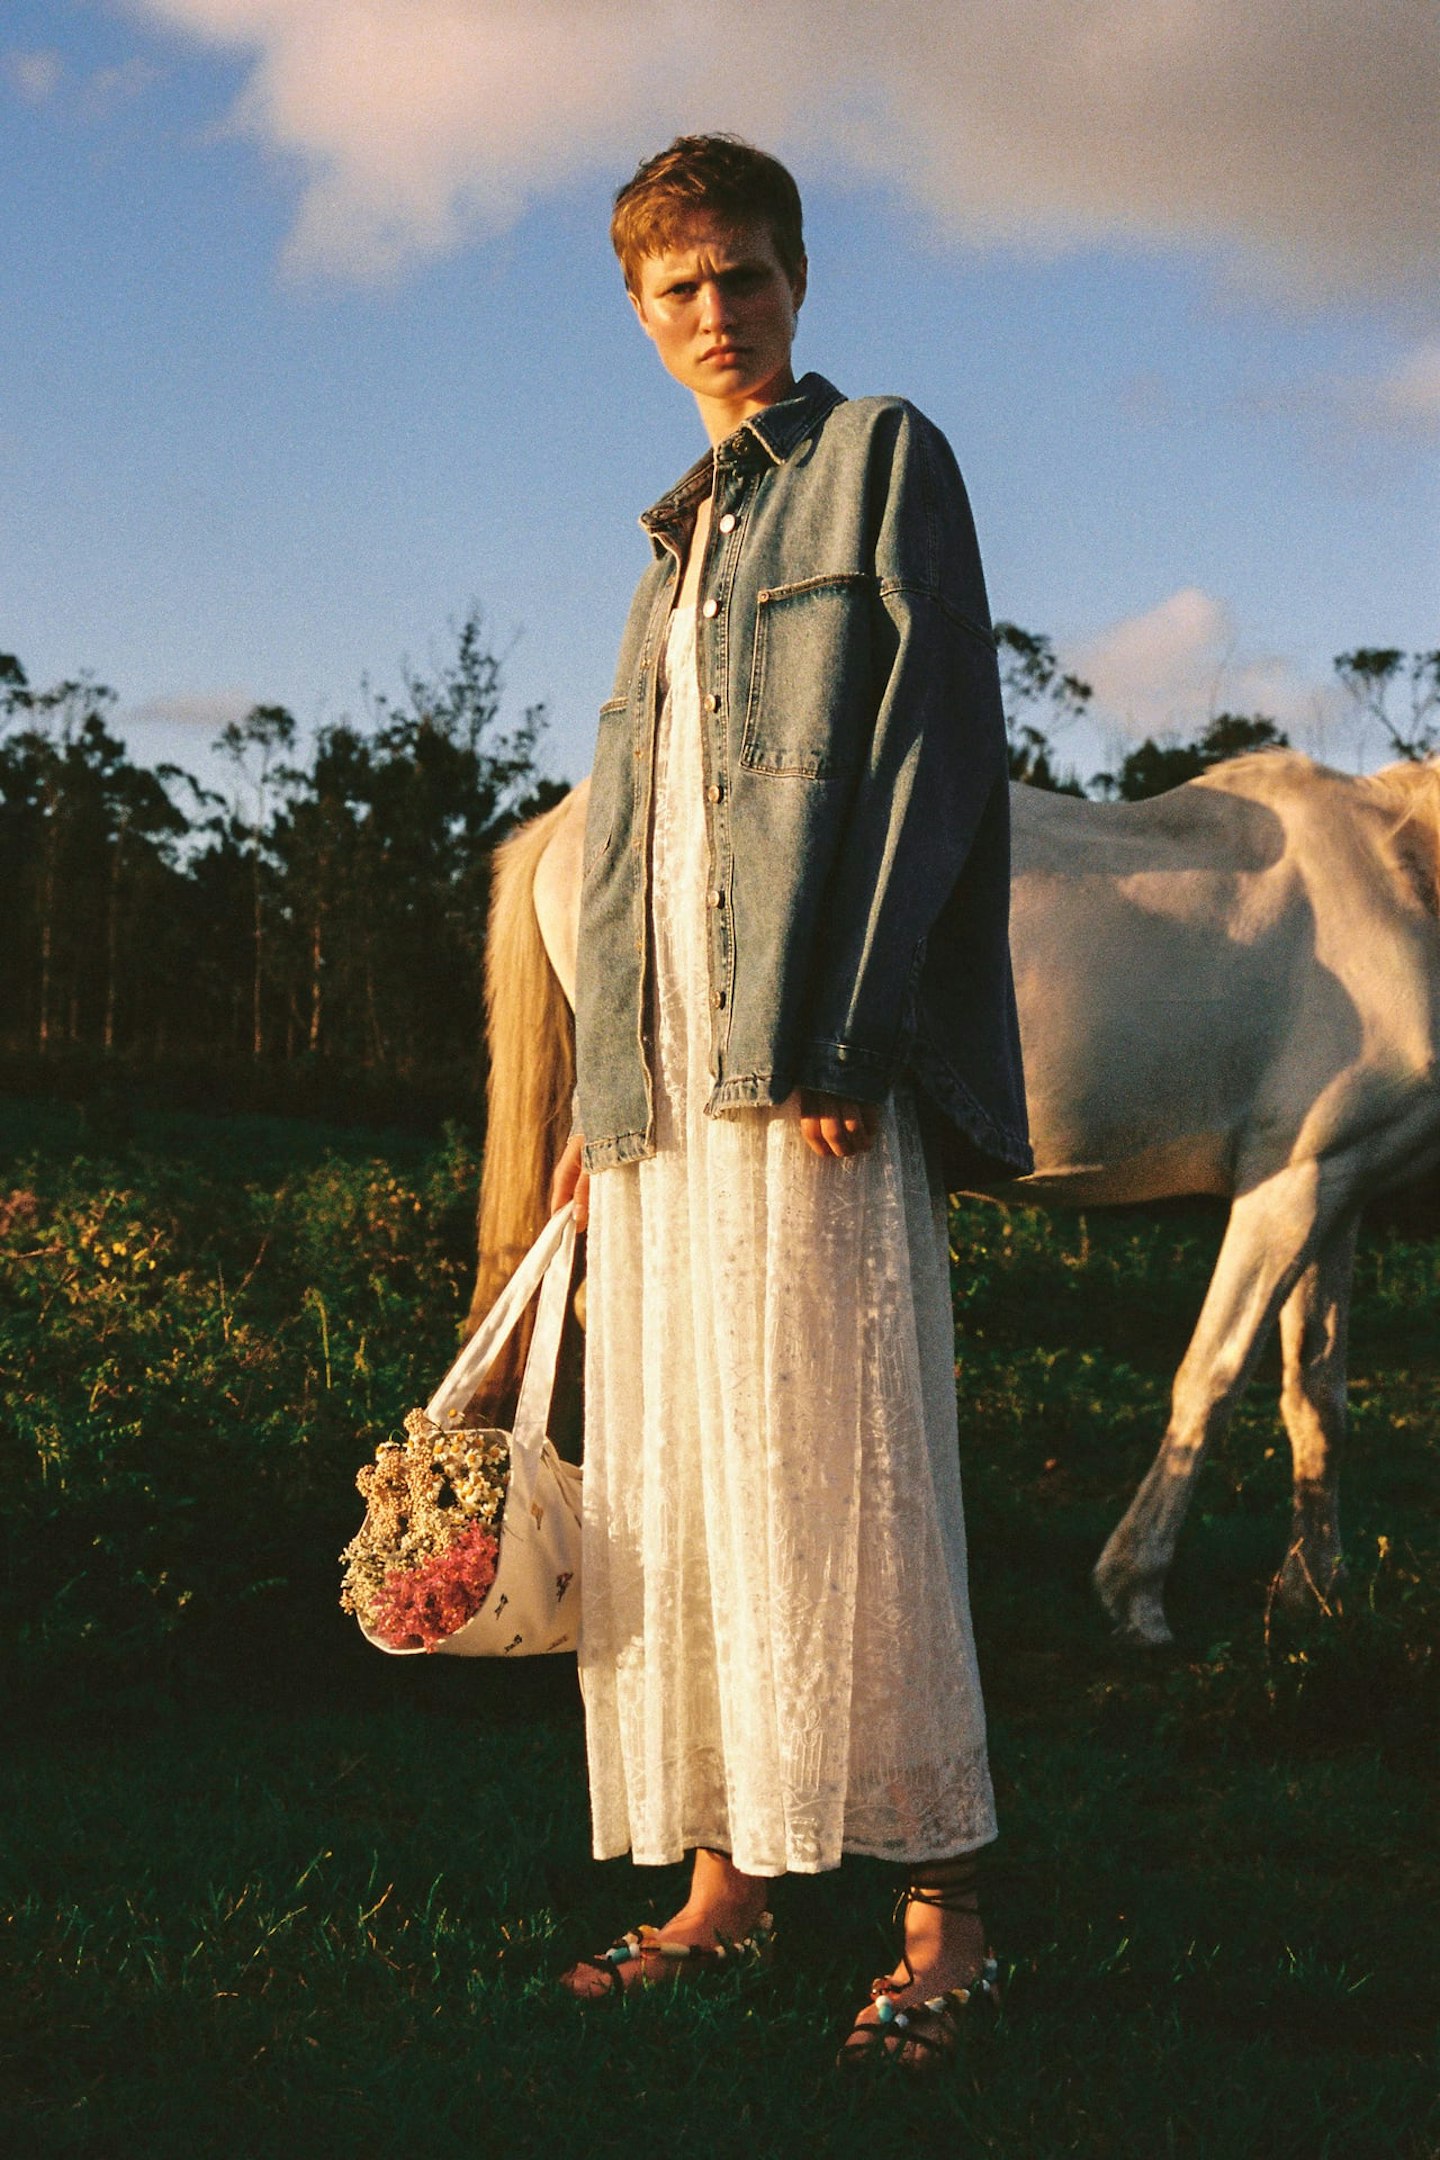 A model wearing a denim jacket and carrying a flower bag 